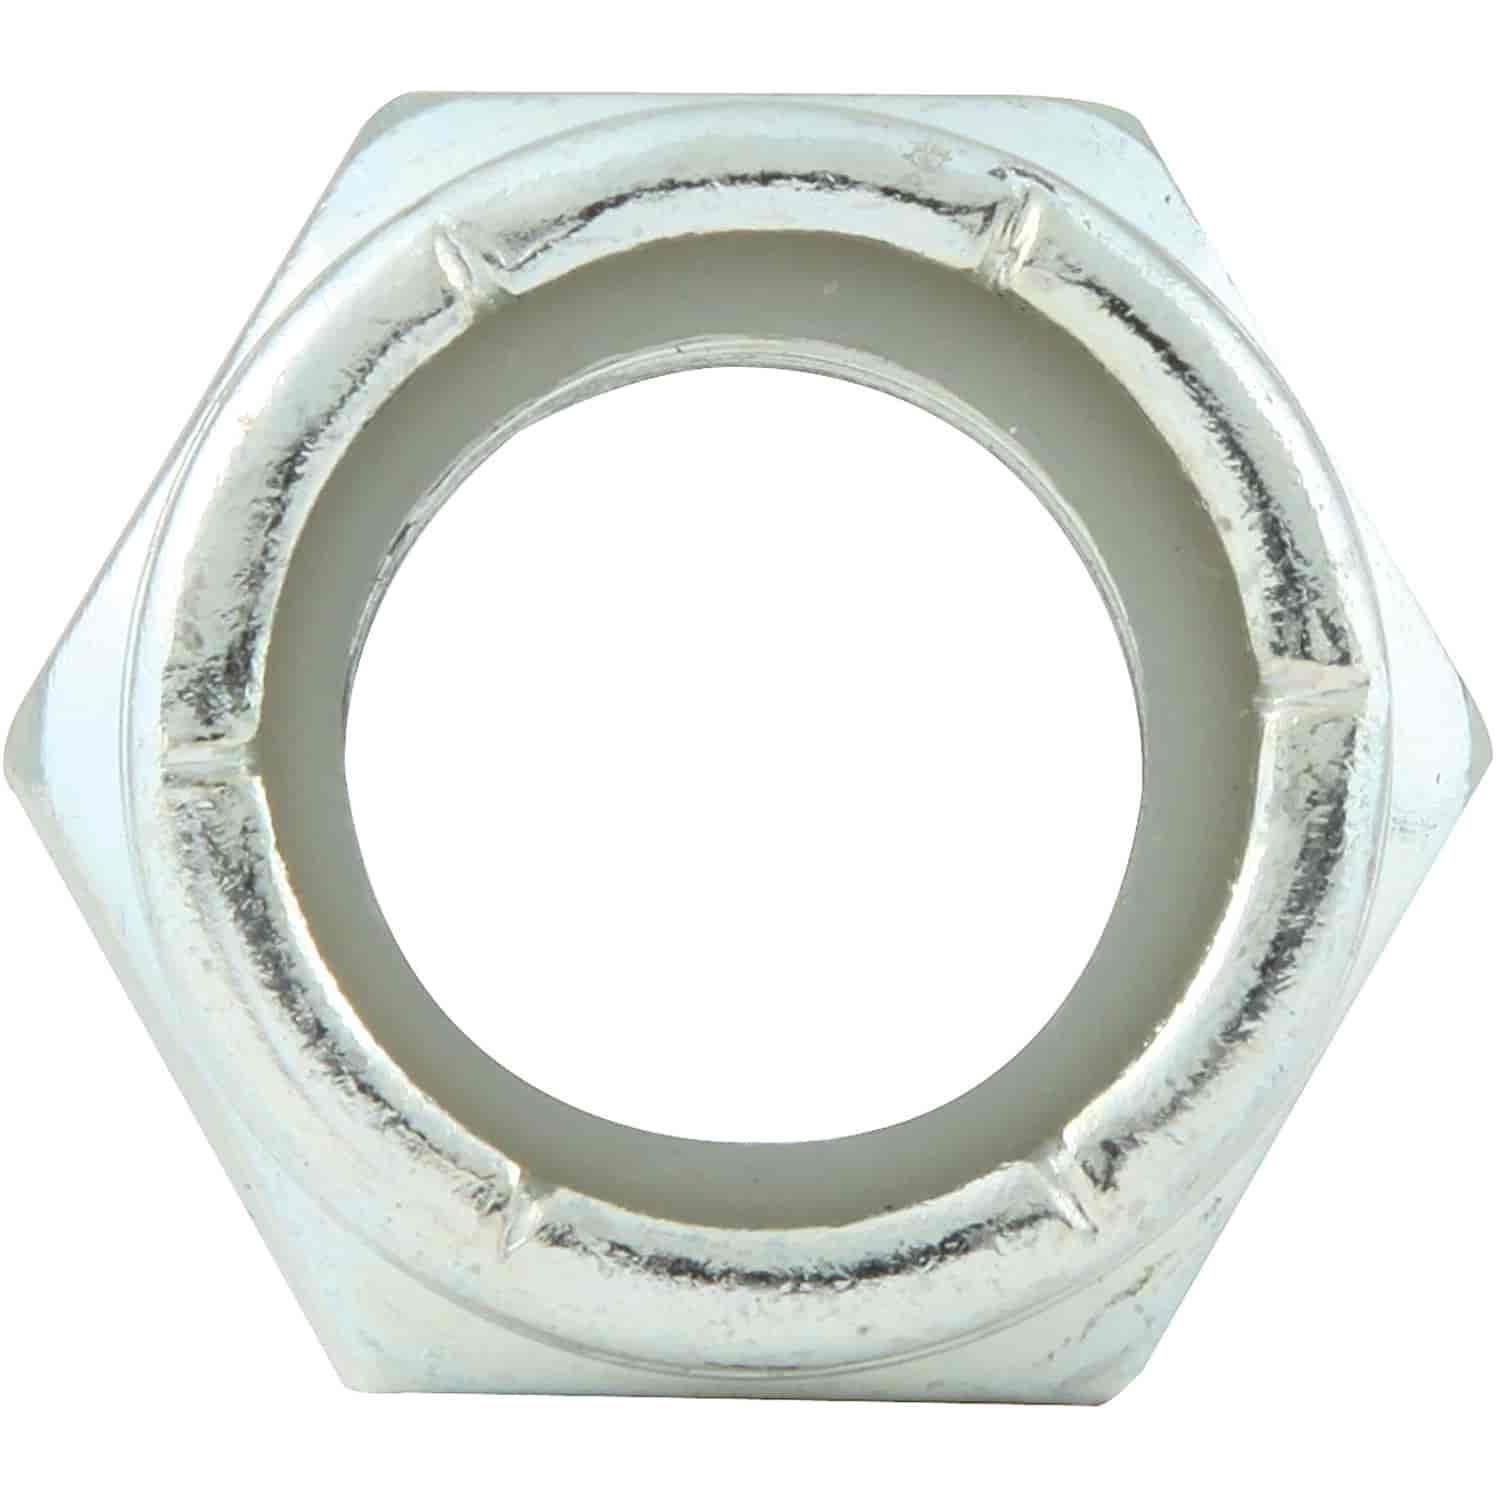 Coarse Thread Hex Nuts With Nylon Inserts 3/4